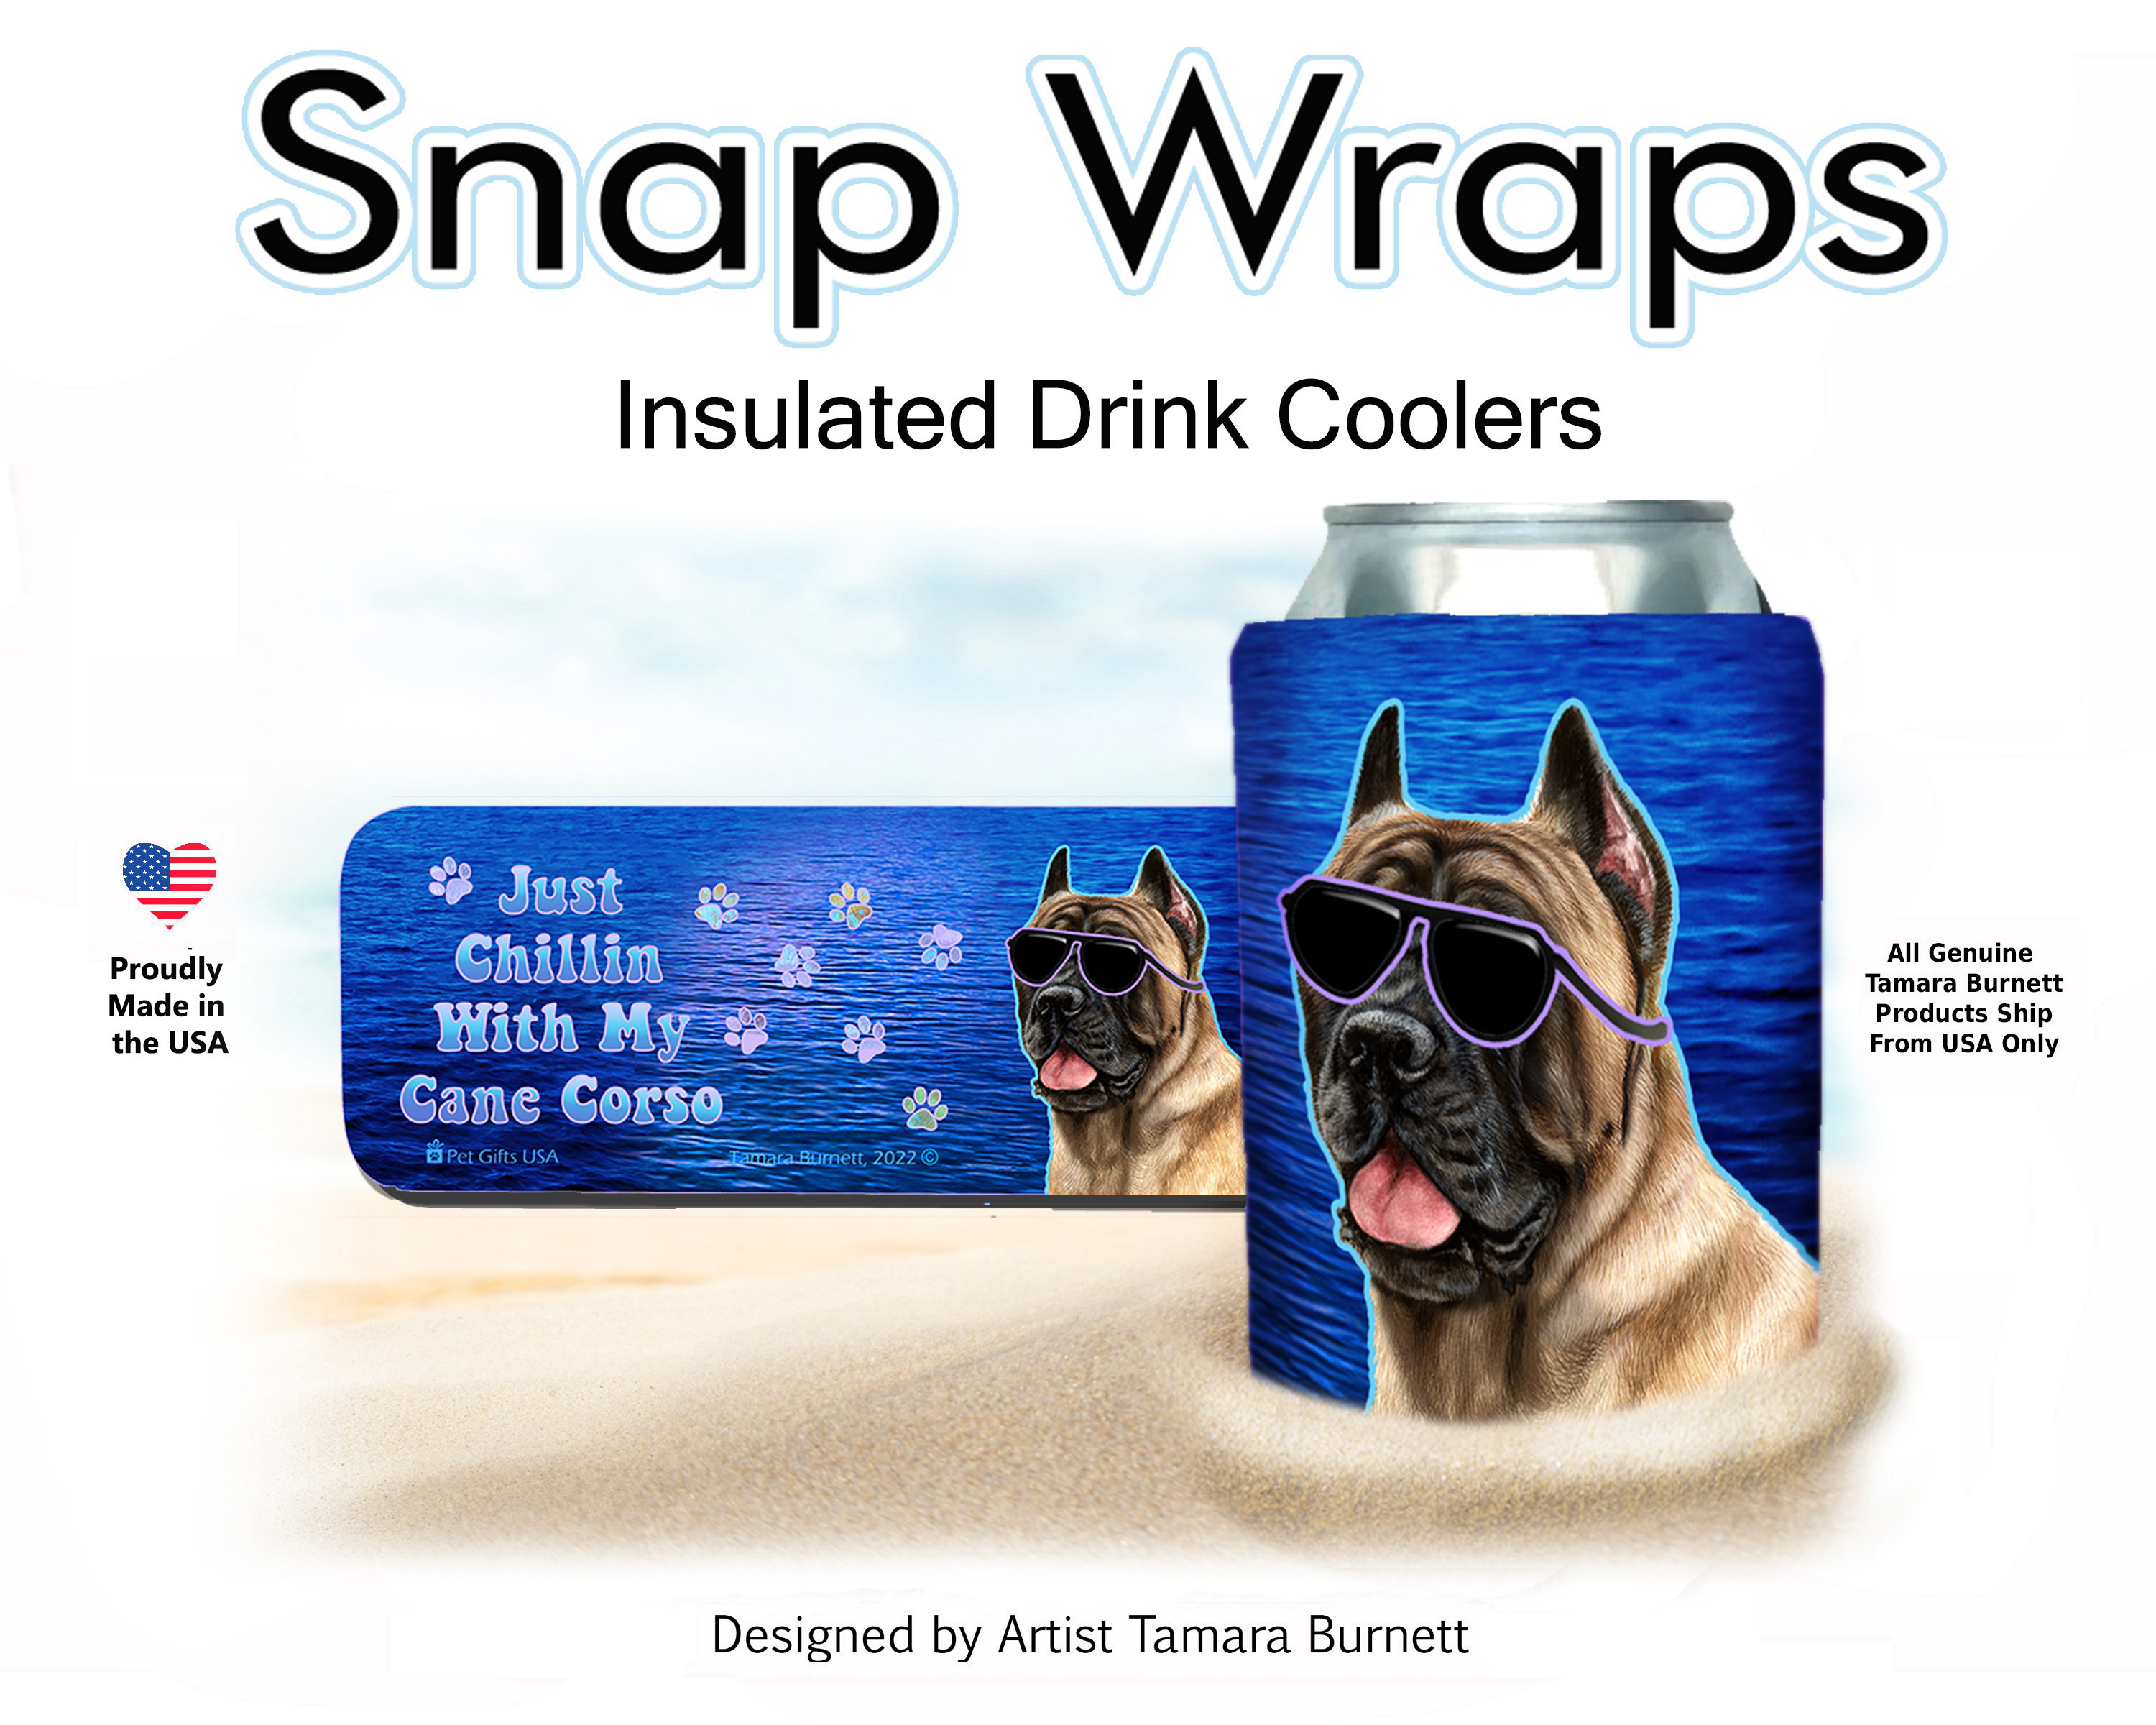 Cane Corso Fawn Snap Wrap Insulated Drink Holder image